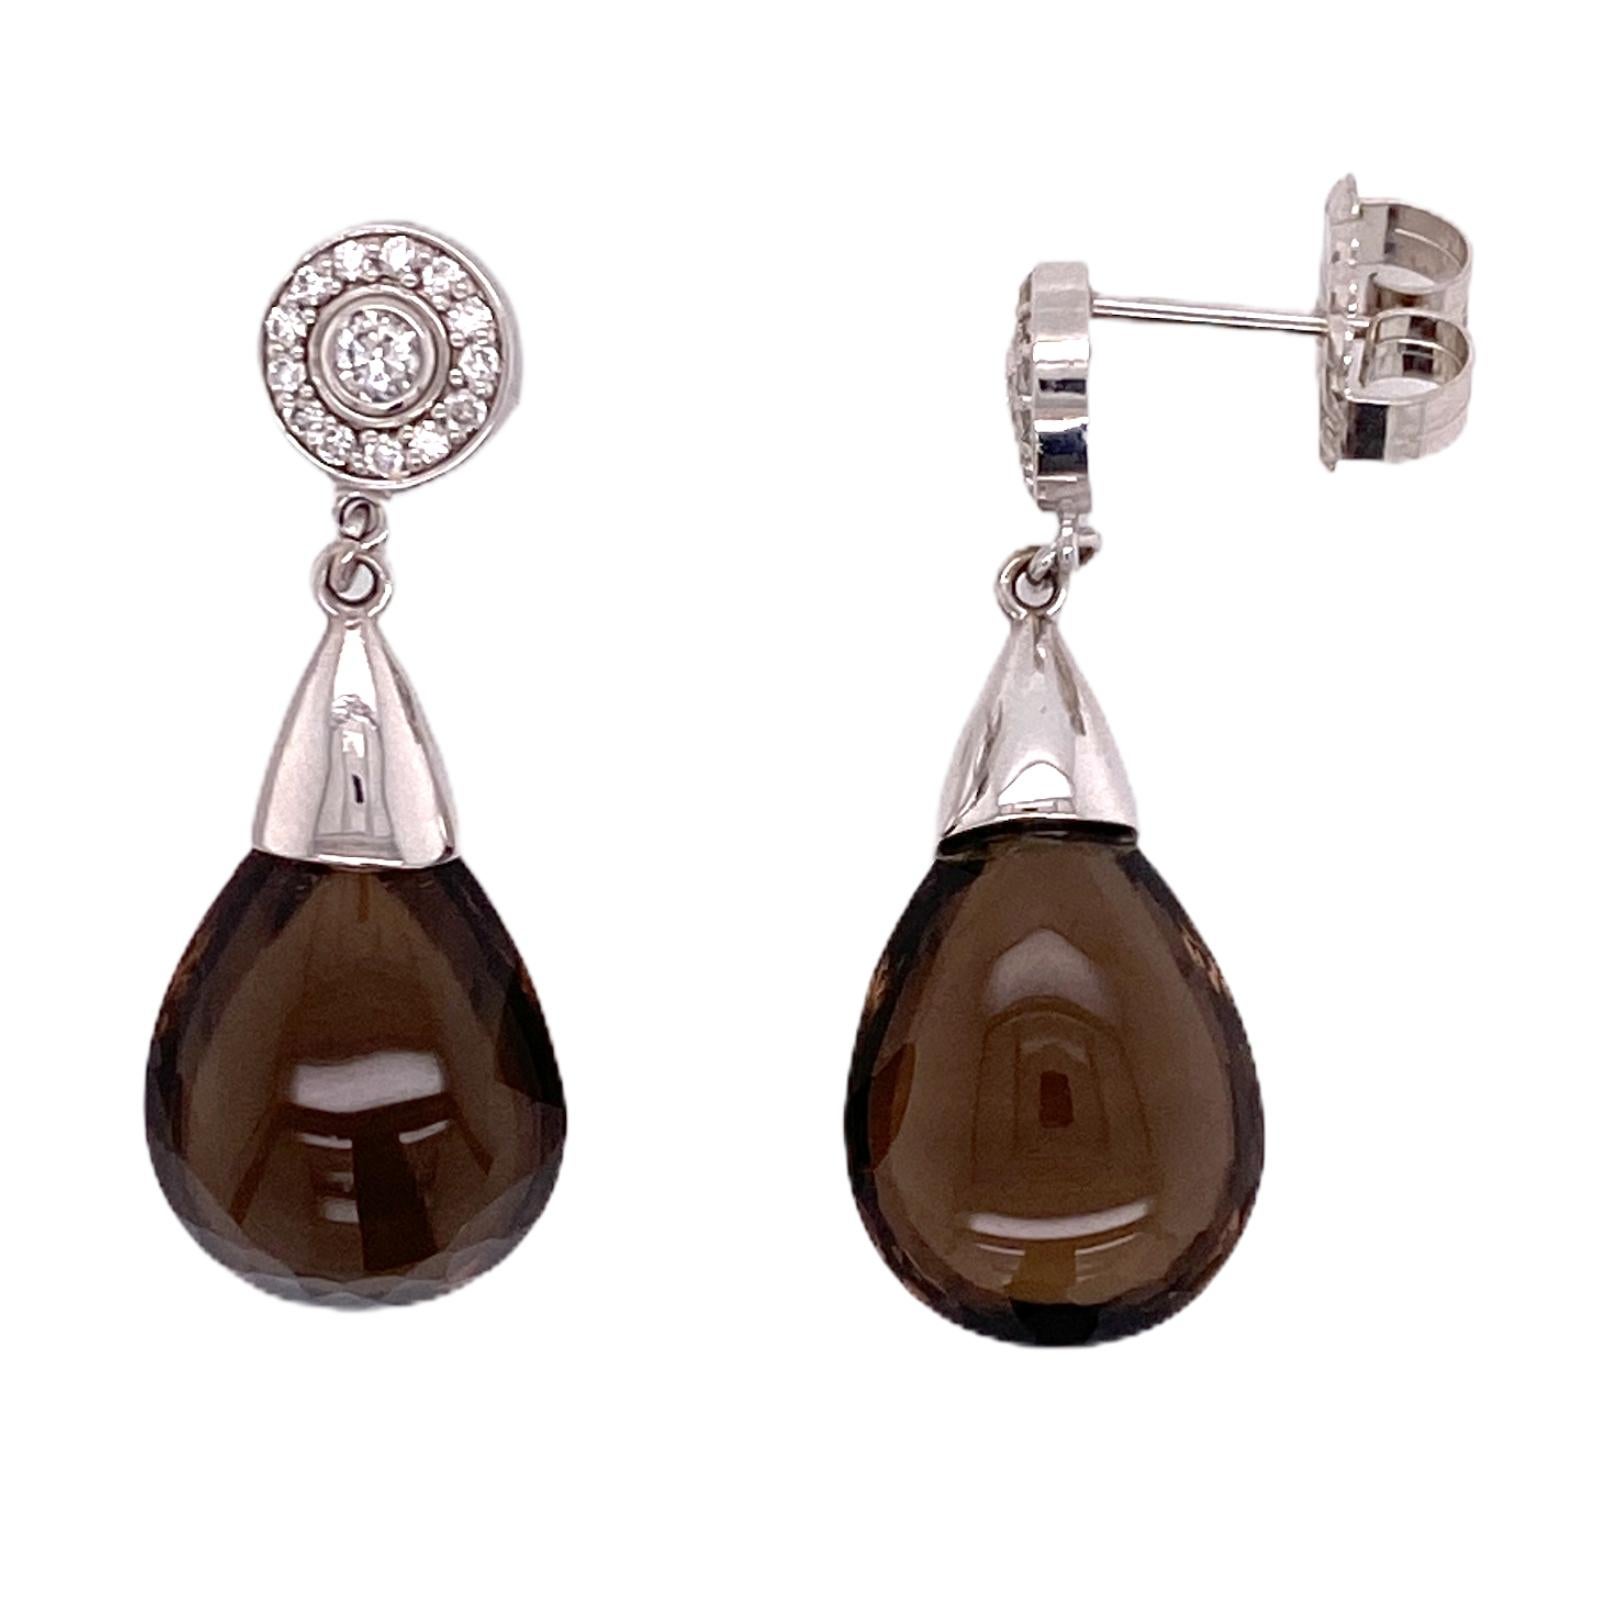 Fabulous diamond and smoky quartz drop earrings fashioned in 14 karat white gold. The earrings feature round brilliant cut diamonds weighing approximately .50 carat total weight. The drops measure 1.50 inches in length and .50 inches in width. 